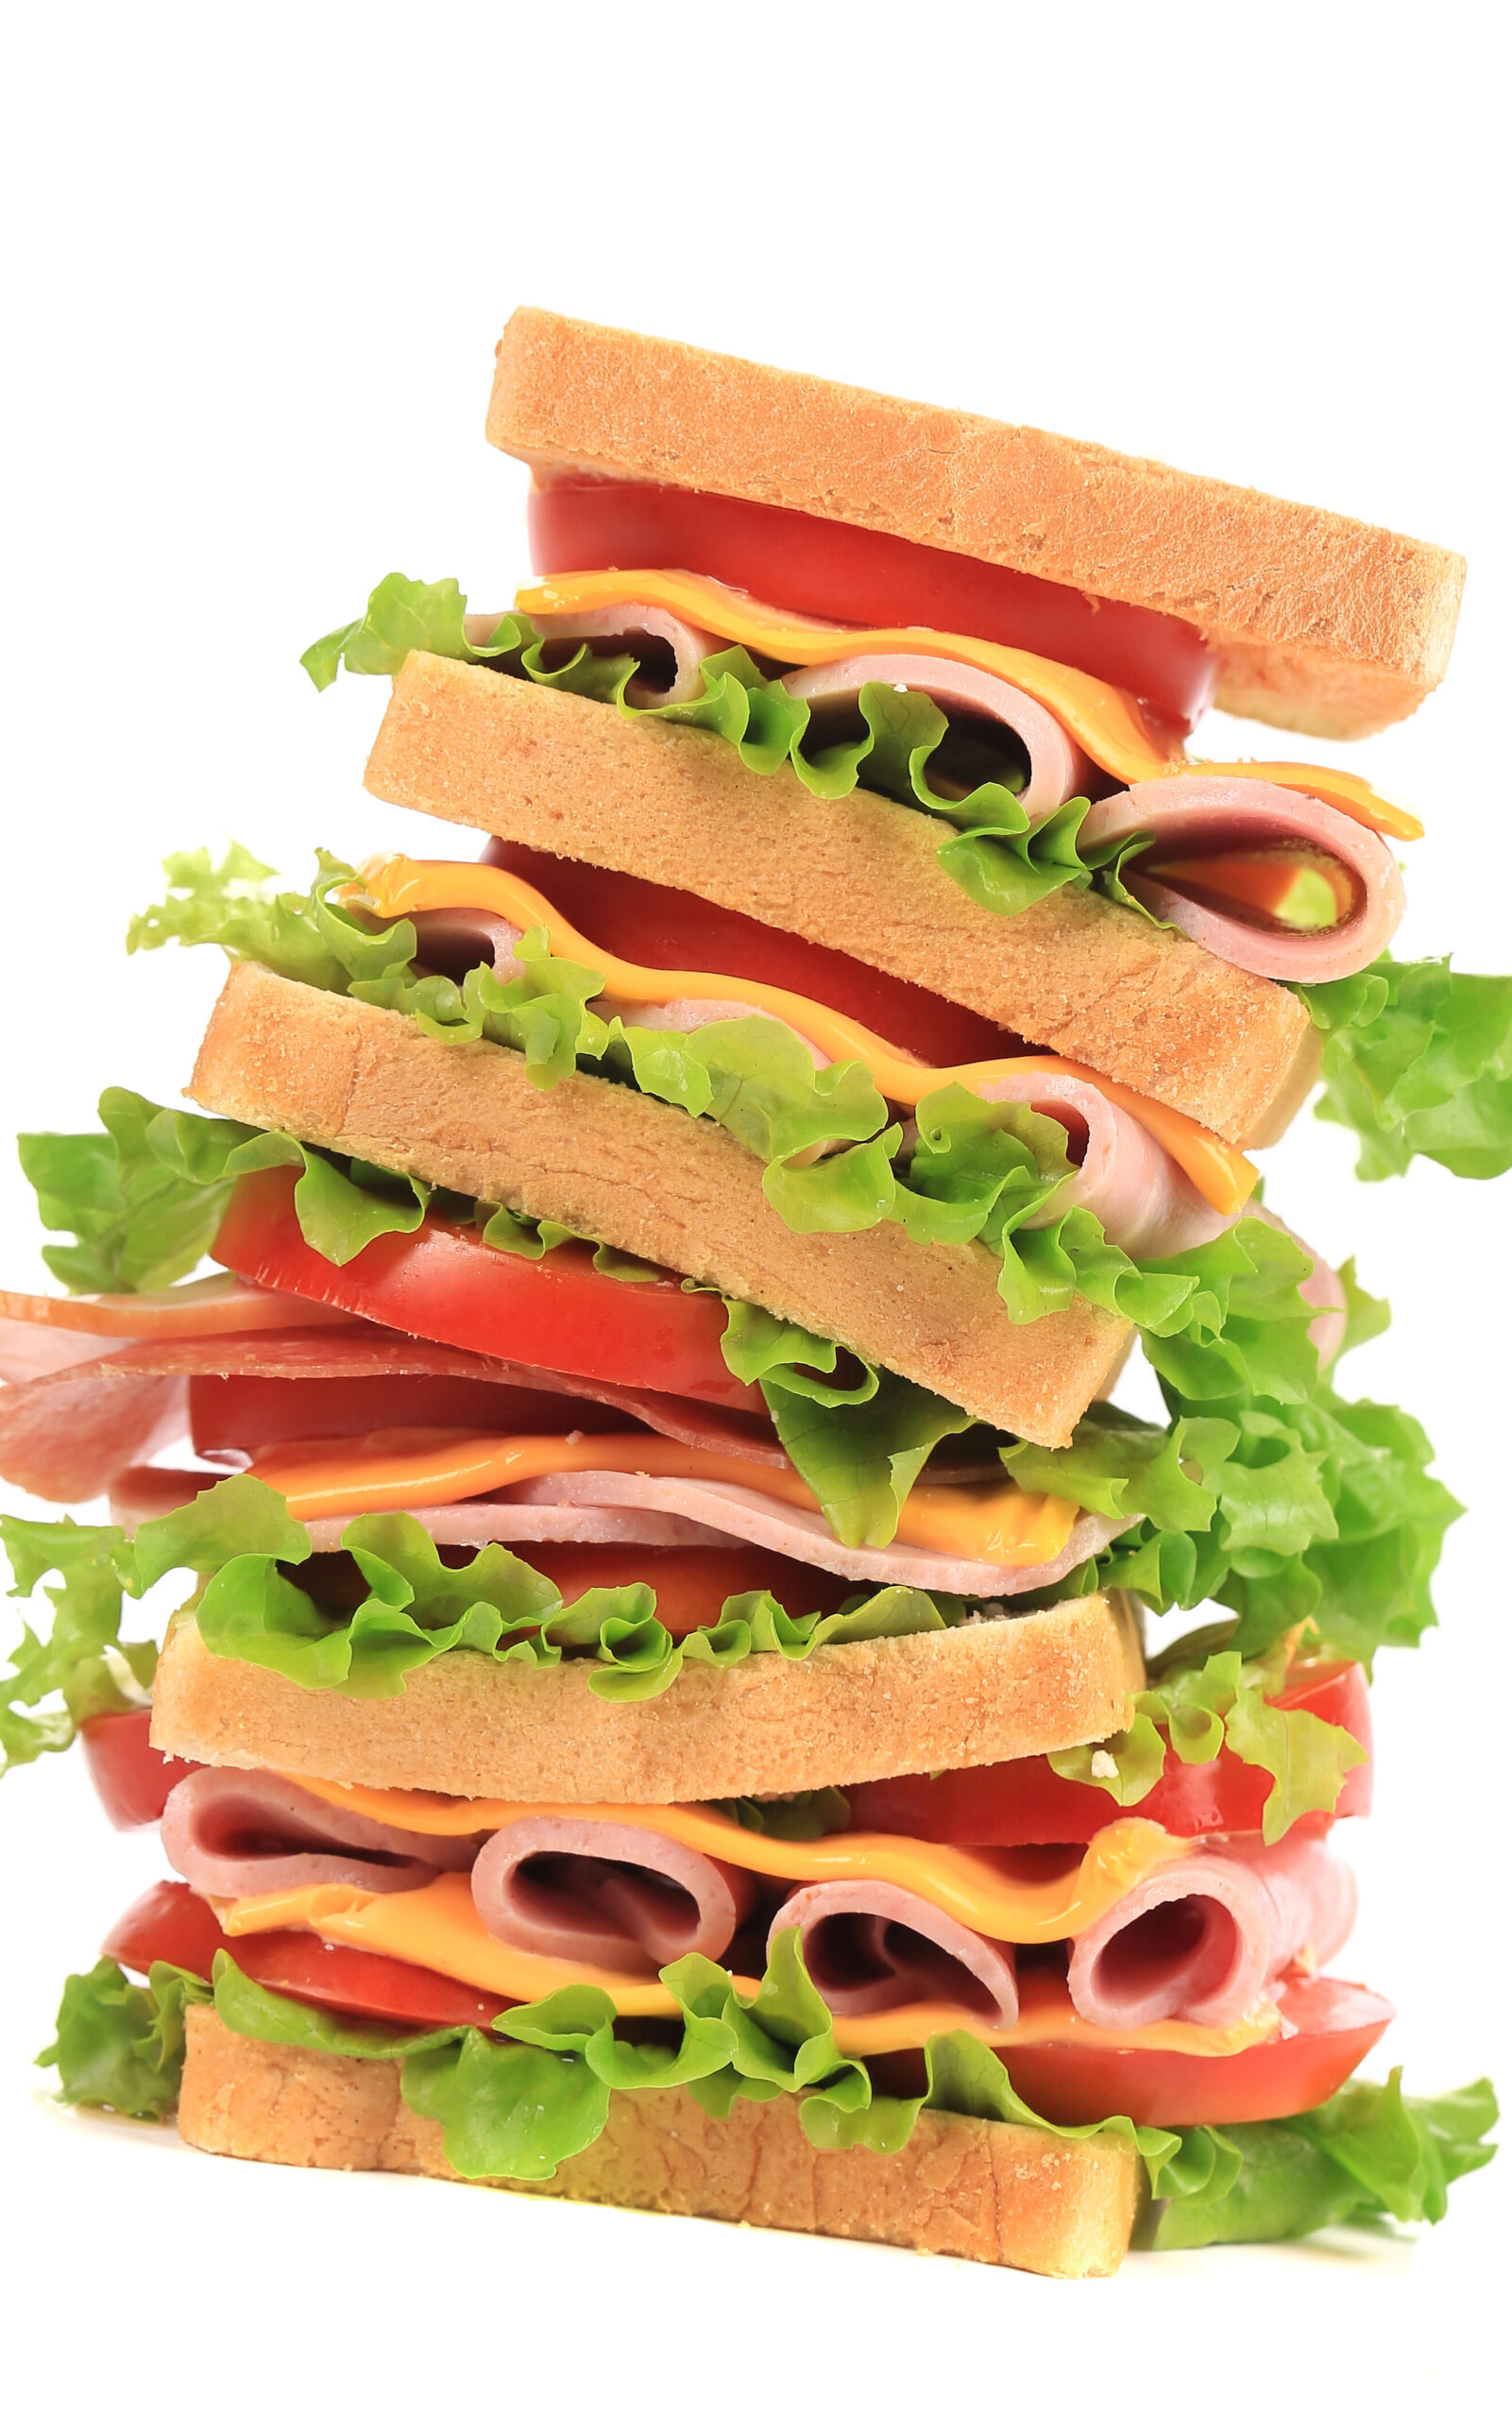 A very tall sandwich! Six slices of bread with tomato, cheese, meat, and lettuce between each pair.